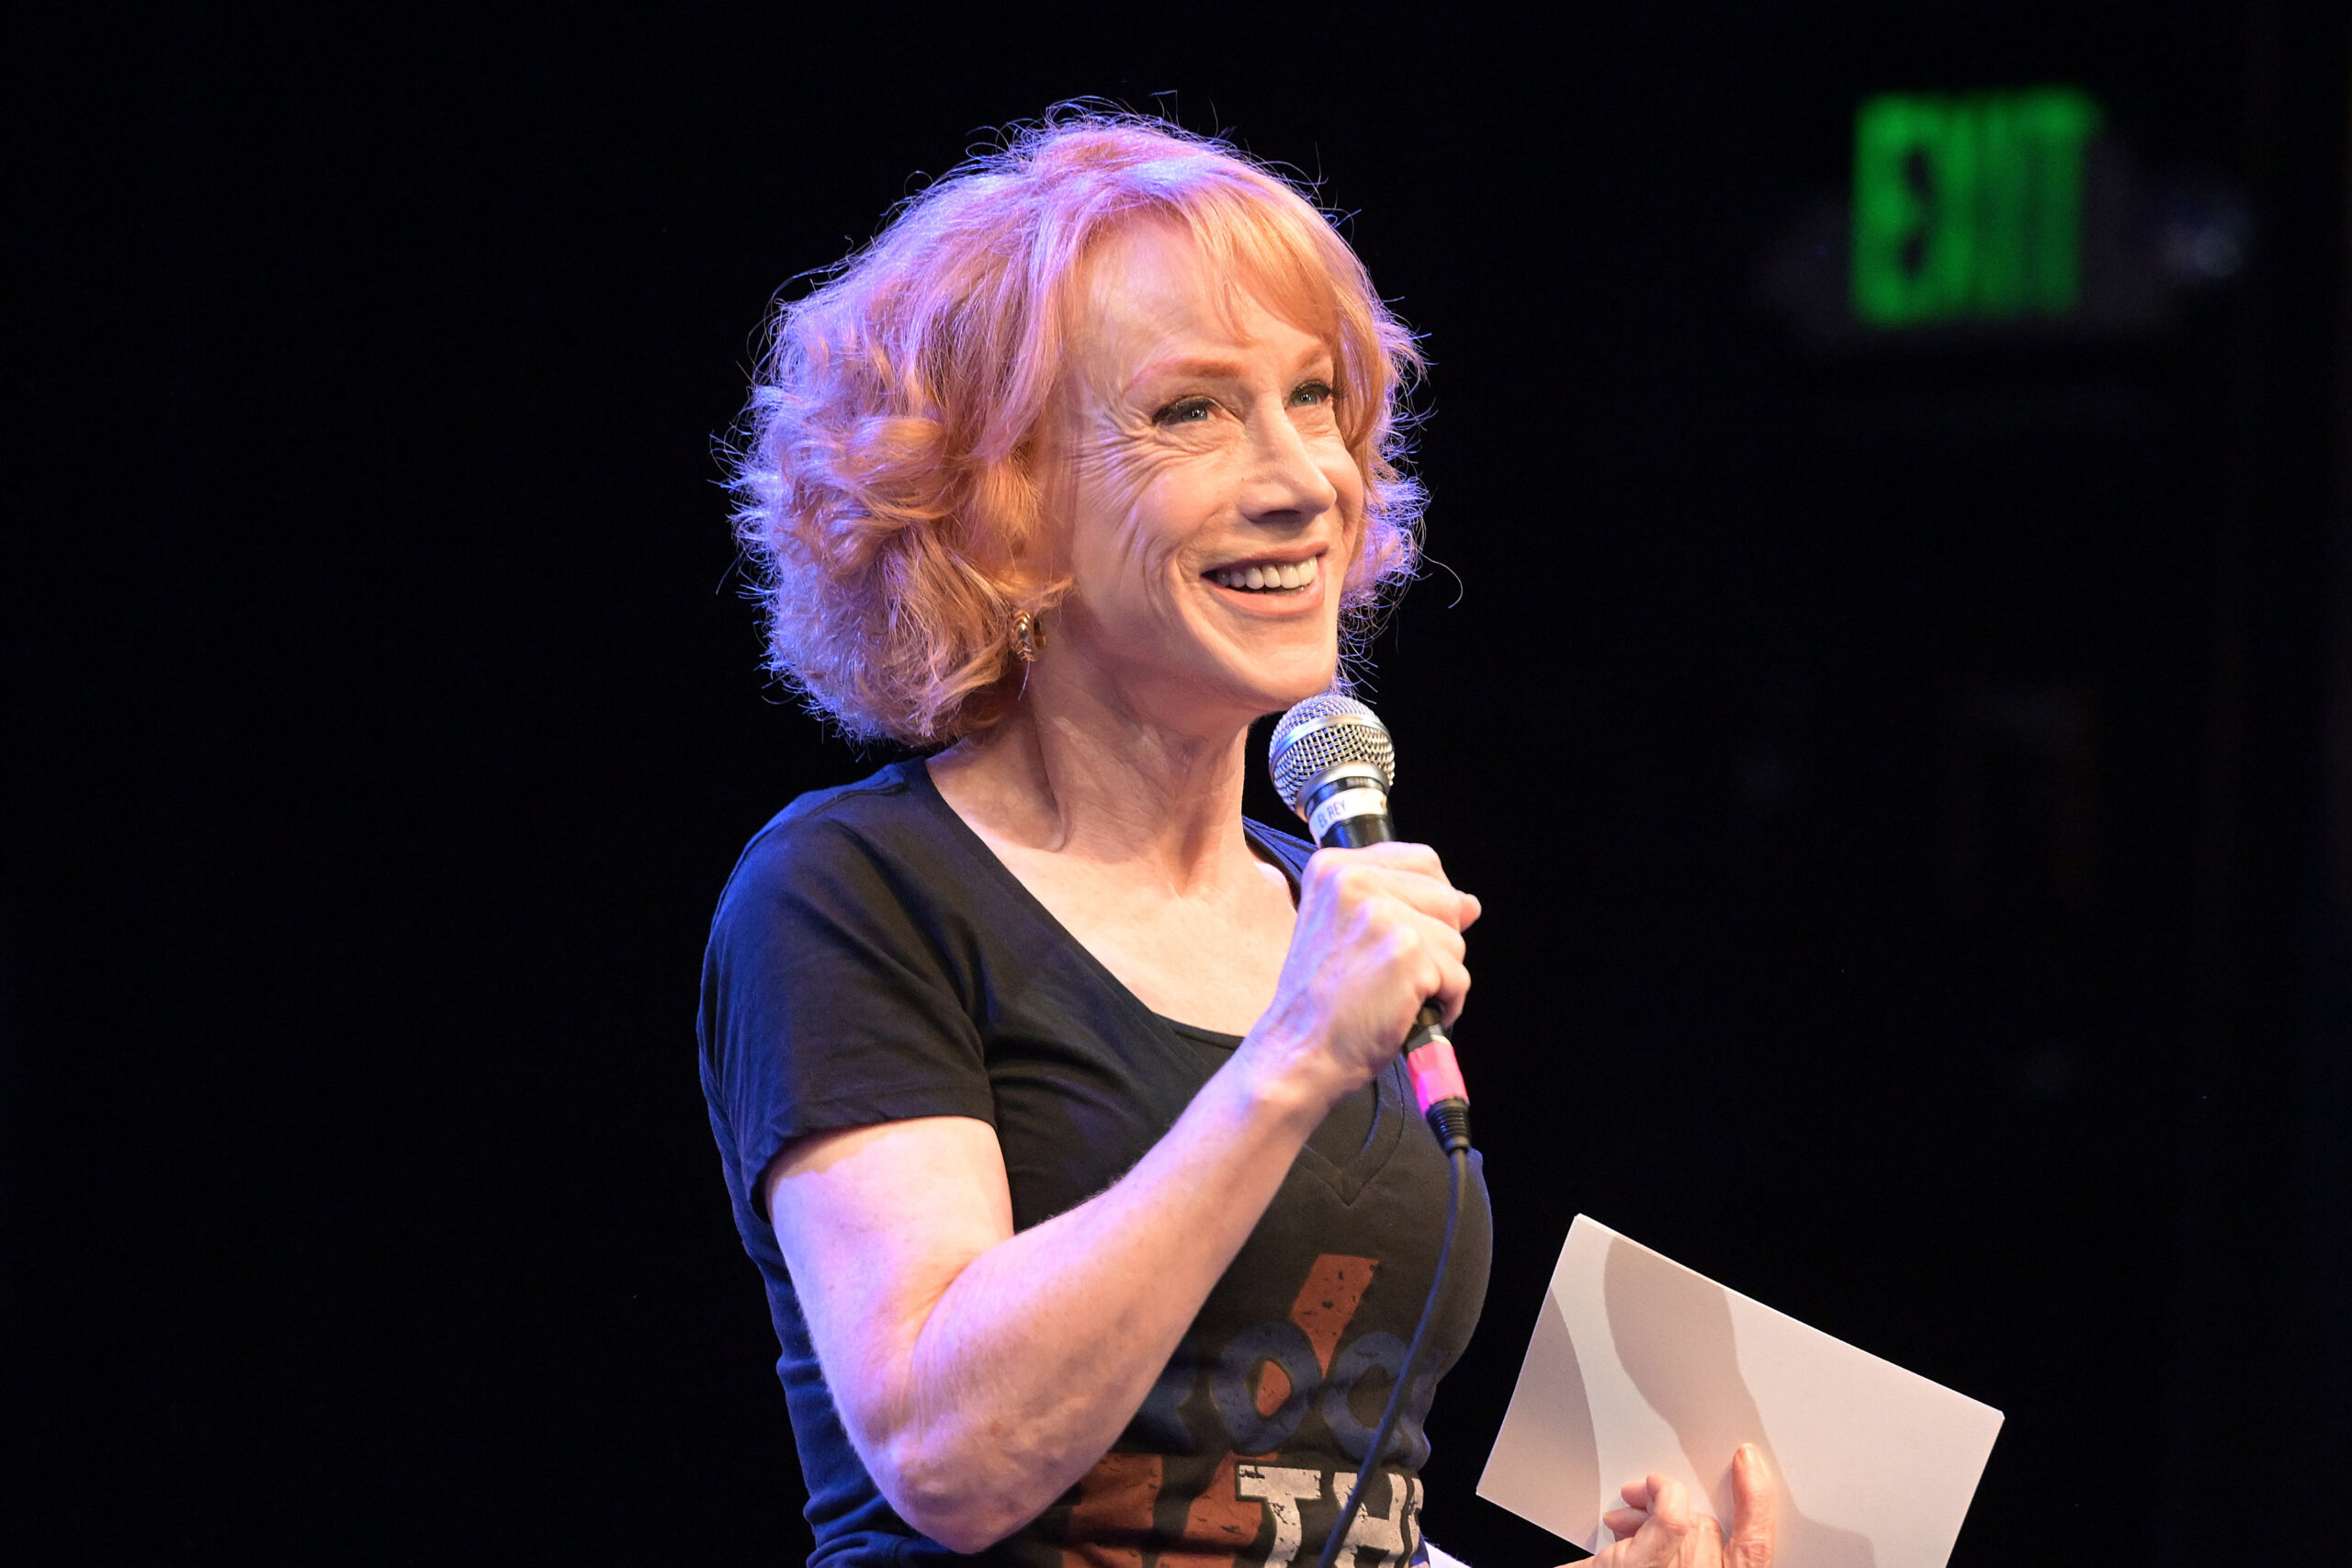 Kathy Griffin: Embracing My Comeback as a Naughty, Grateful Comedian